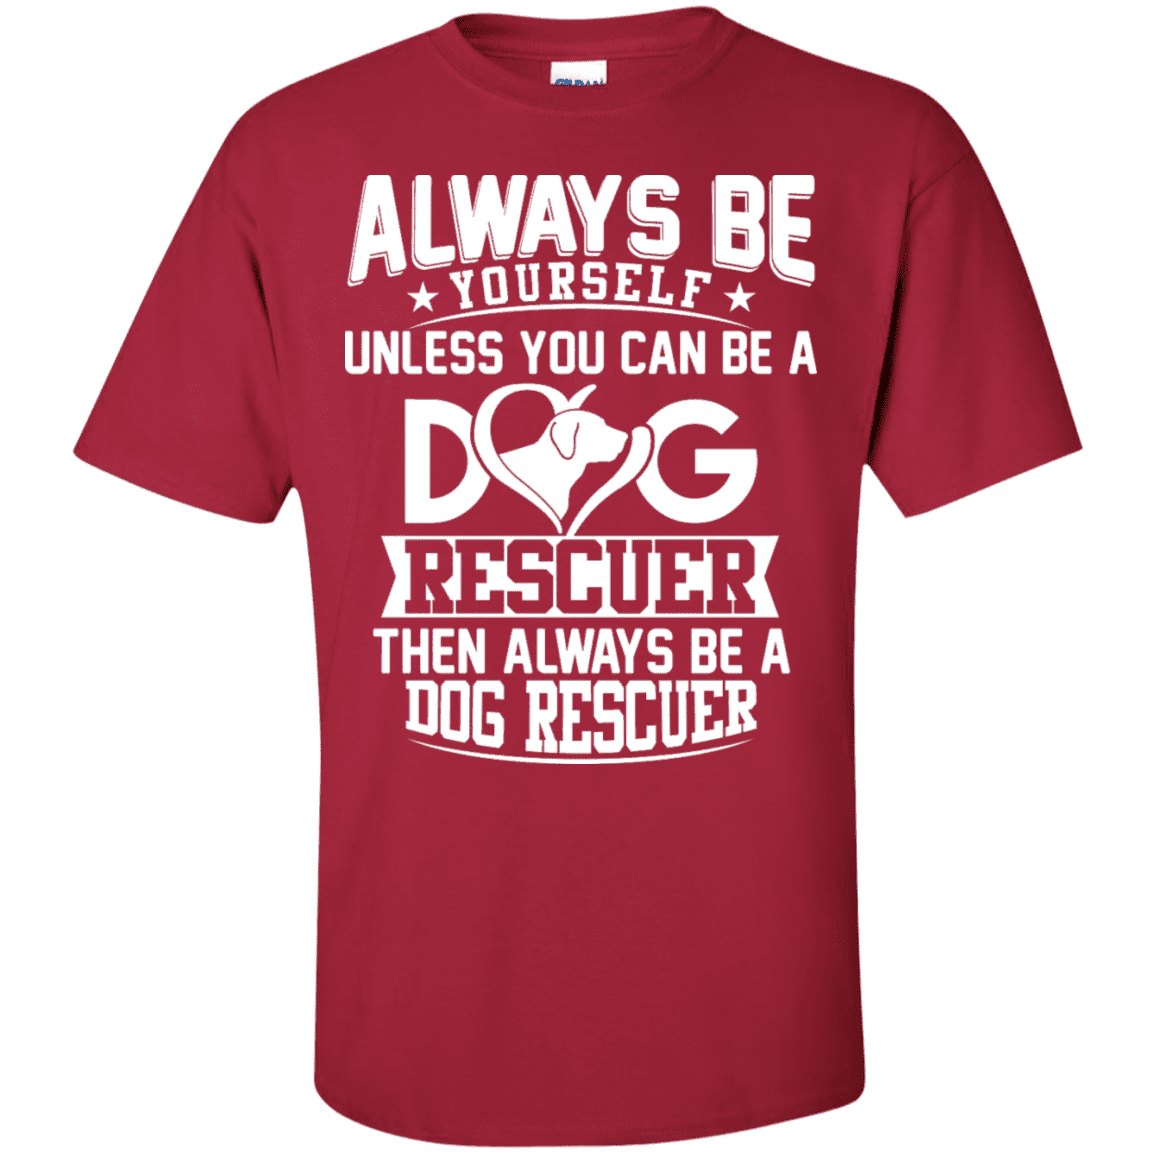 Always Be A Dog Rescuer - T Shirt.